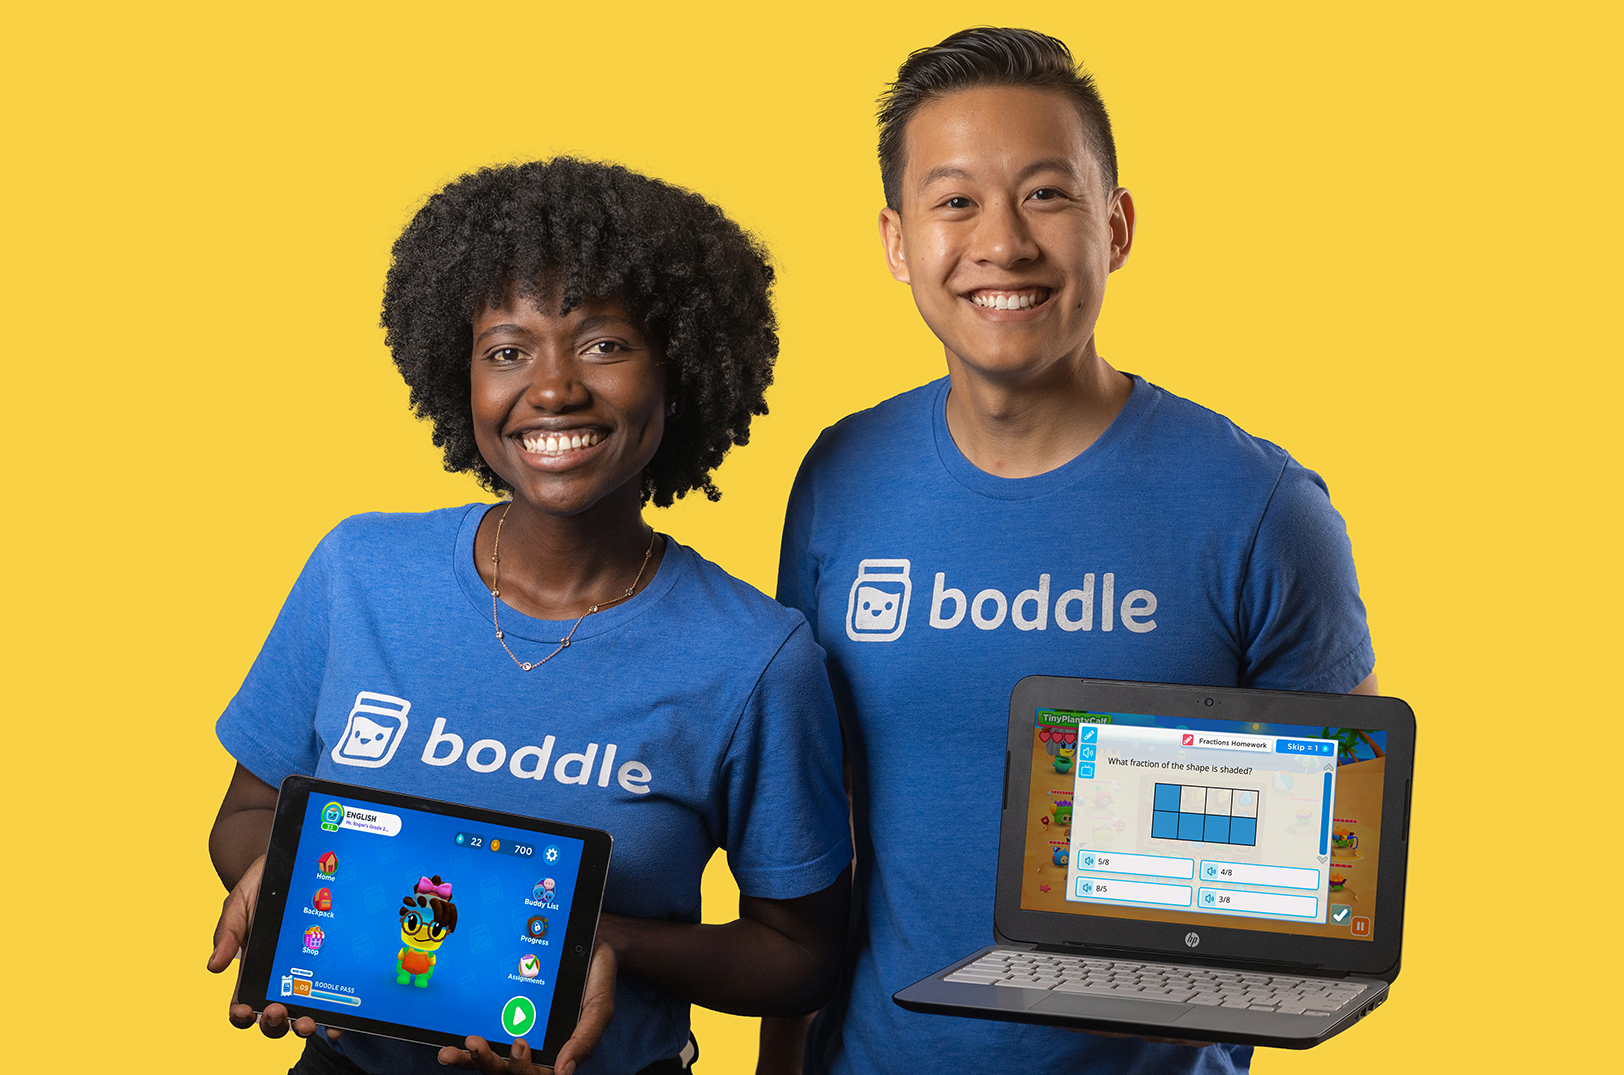 Tech piloted in KC classrooms went viral, now Boddle has raised $3M in seed funding